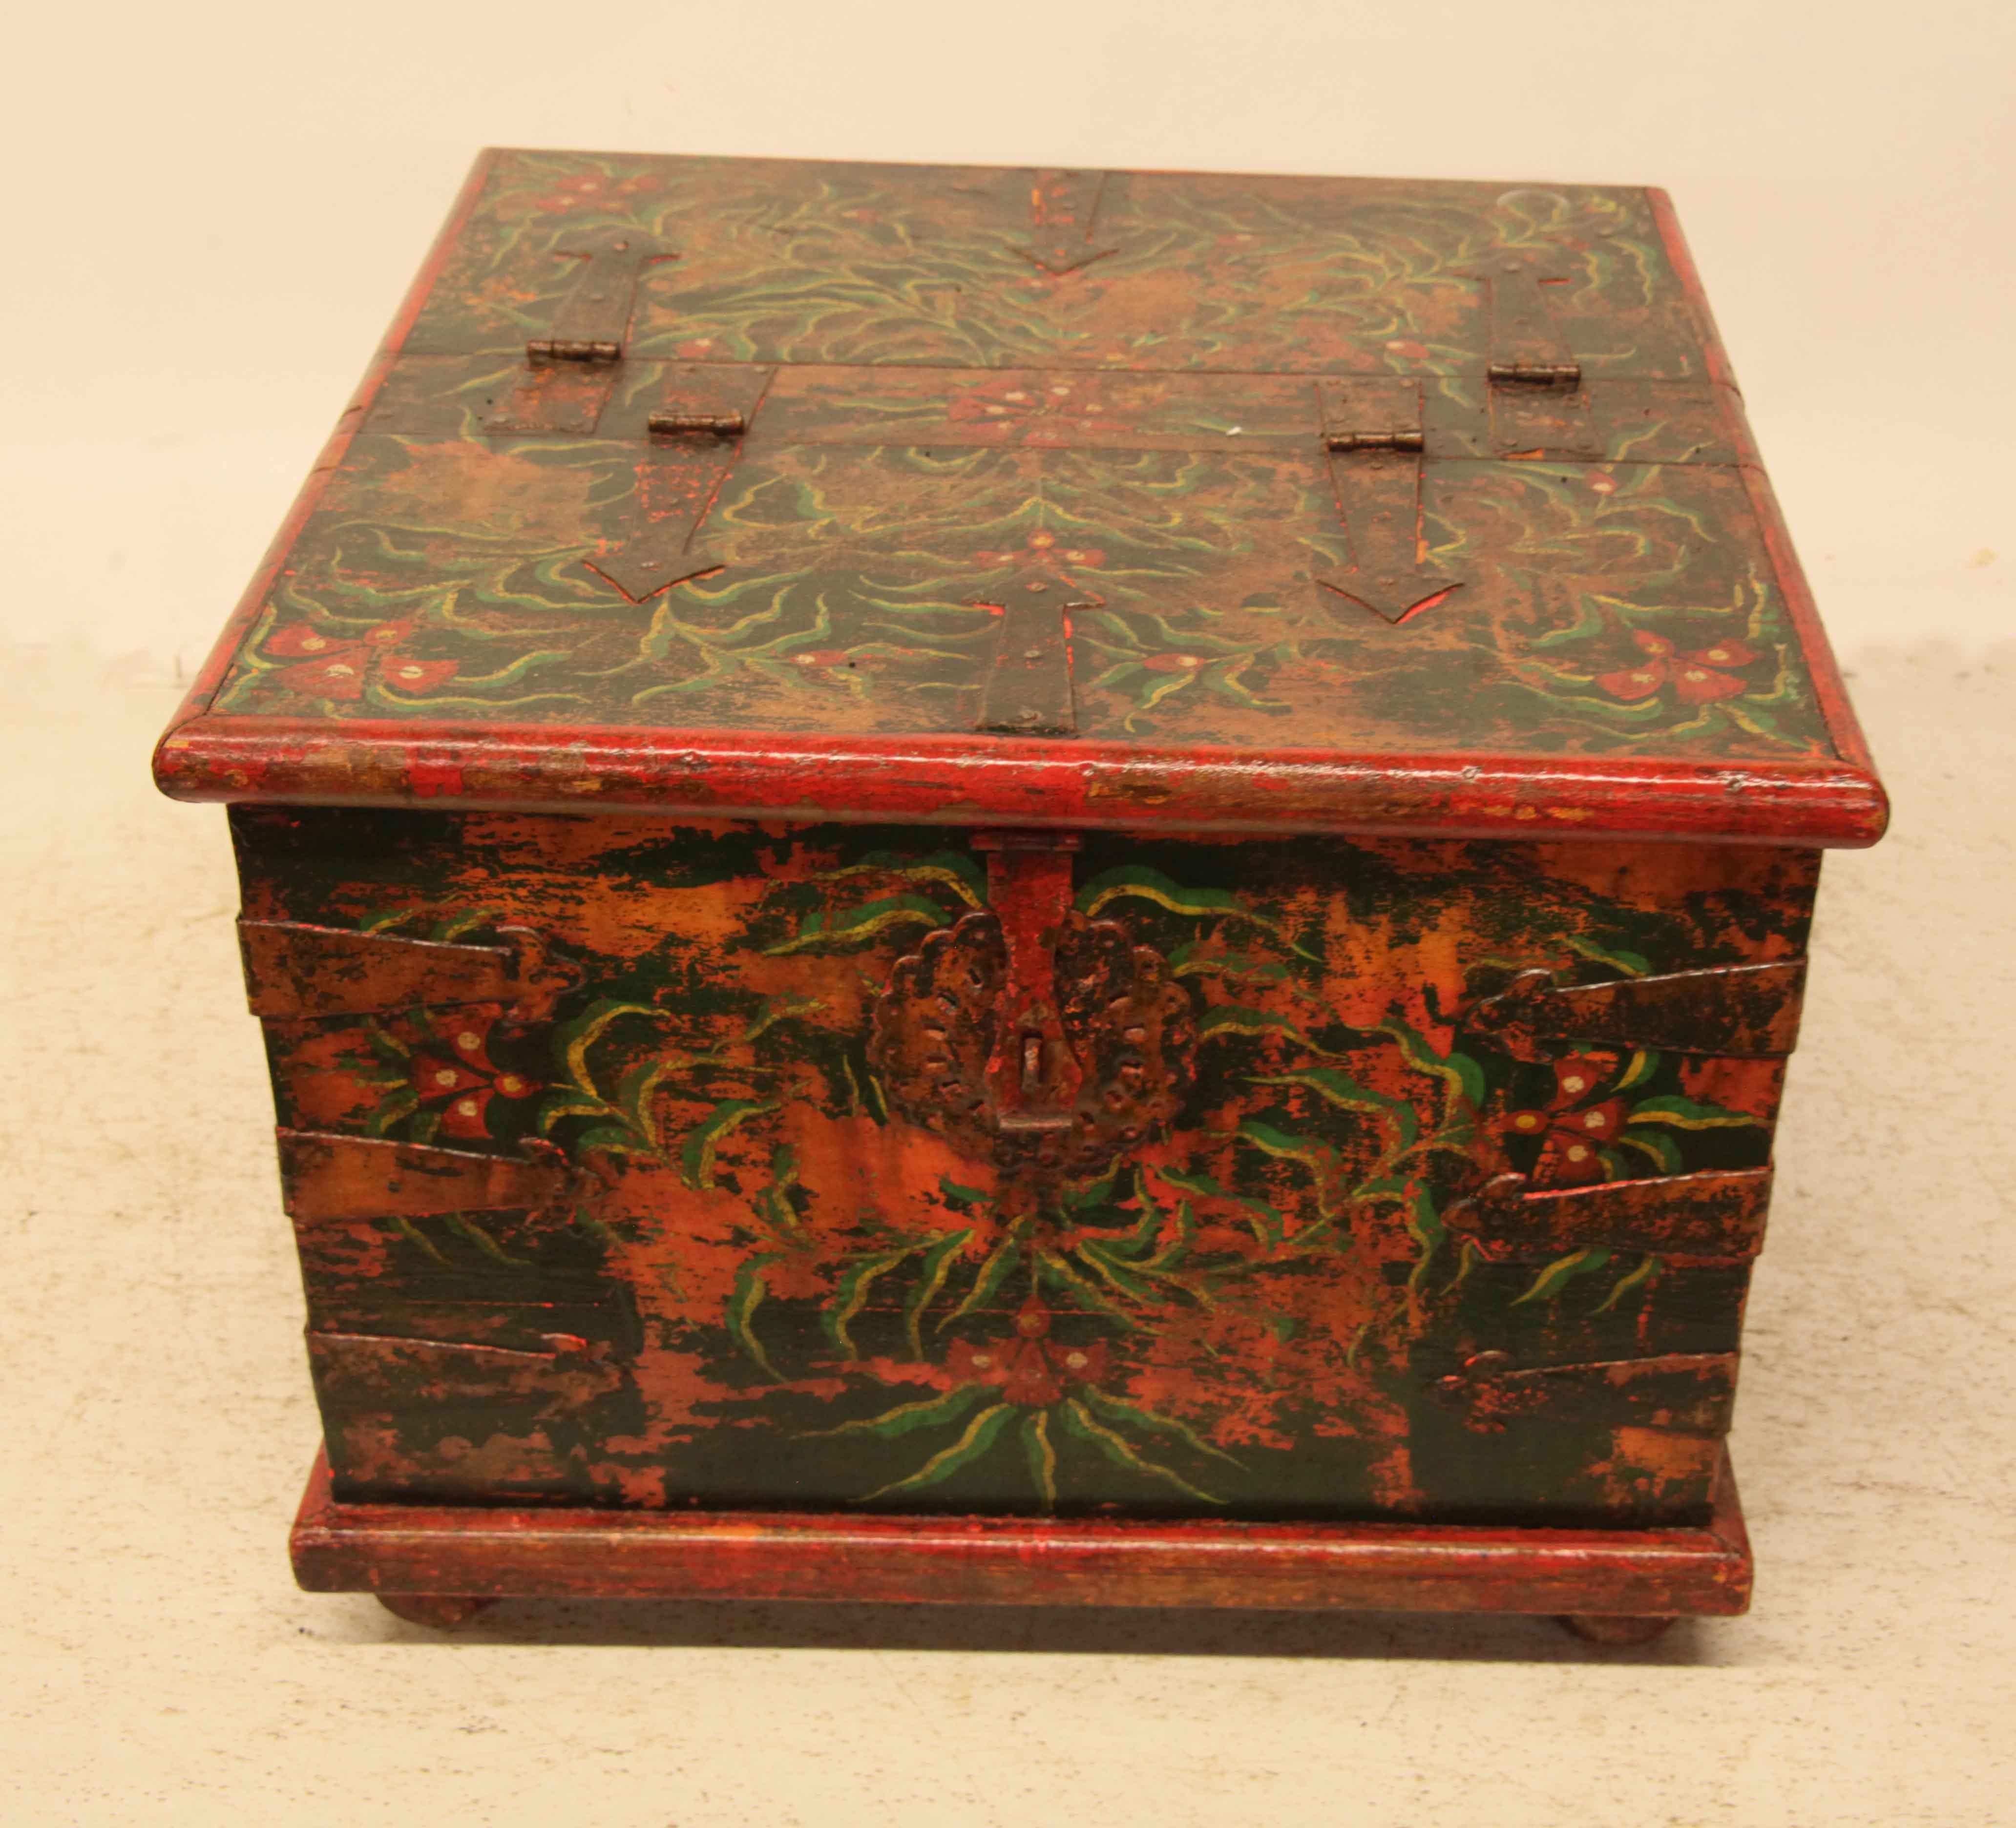 Painted four sided box, the top is split and hinged on each half to allow access from both sides; all sides and top with similar decorative and vivid painting featuring stylized flowers and foliate. The two sides that open have a reticulated round